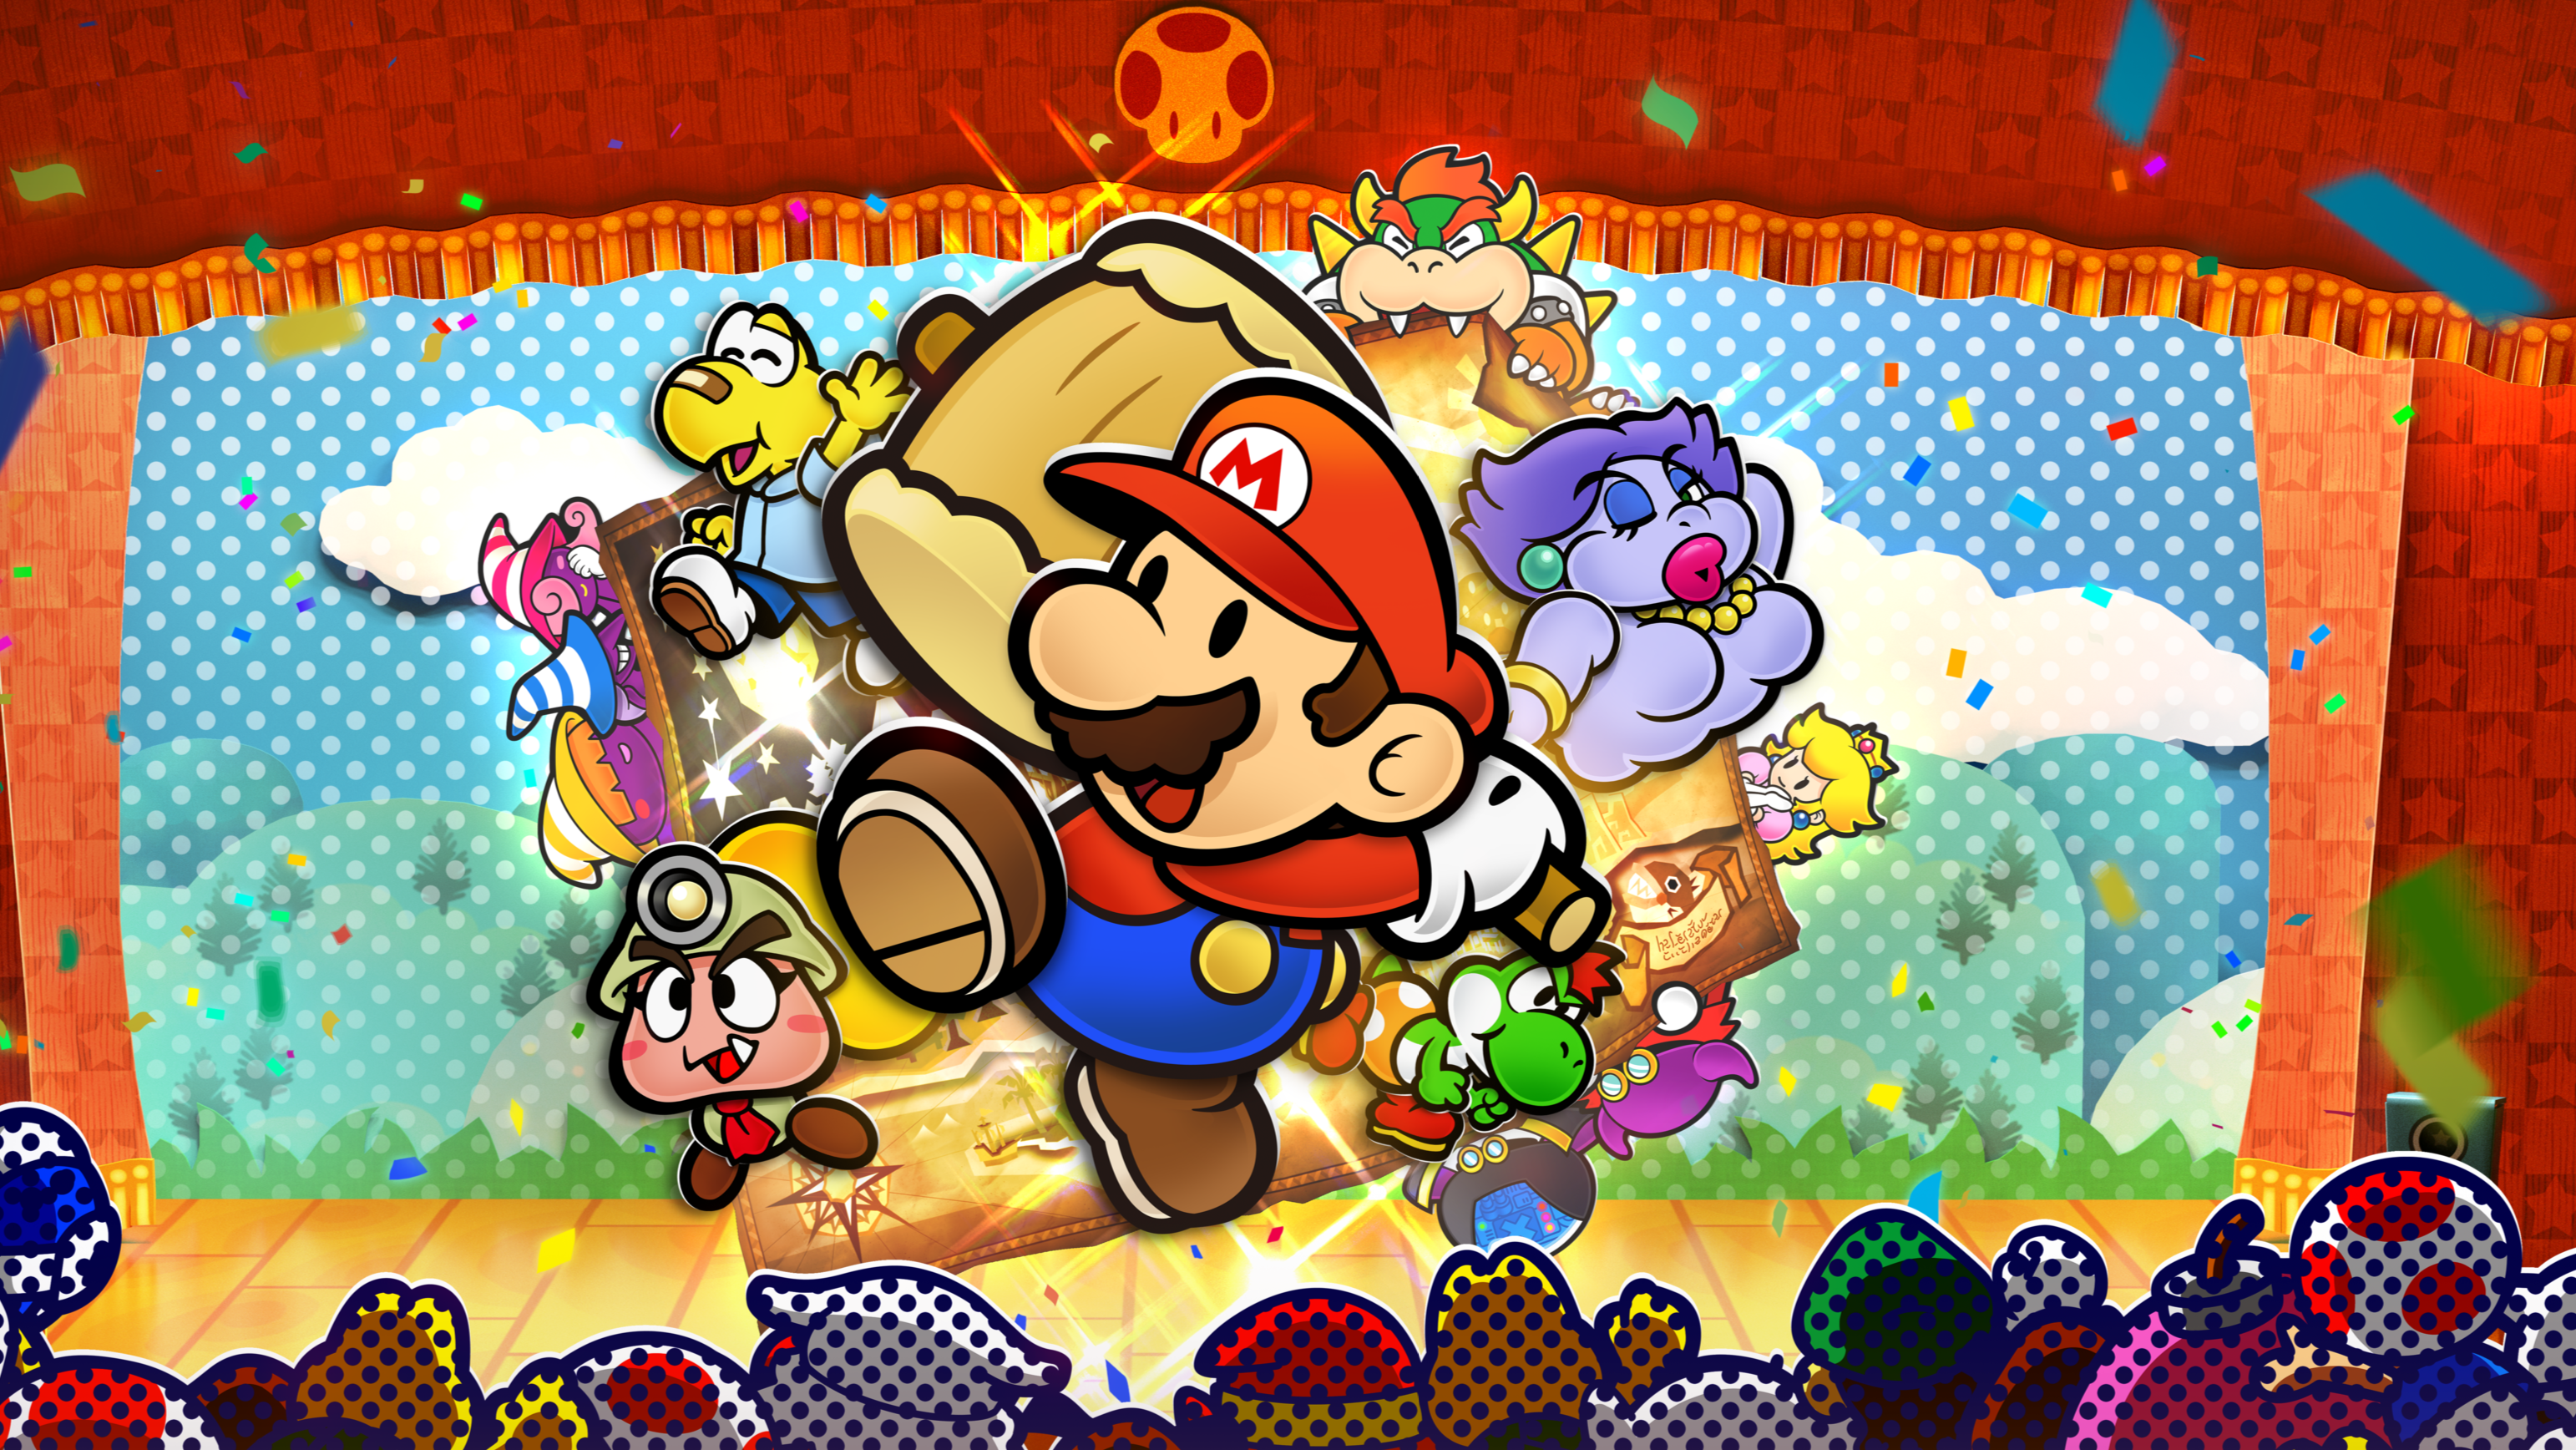 Paper Mario: The Thousand-Year Door artwork showing Mario, holding a mallet, bursting forward from a curtained stage surrounded by other characters